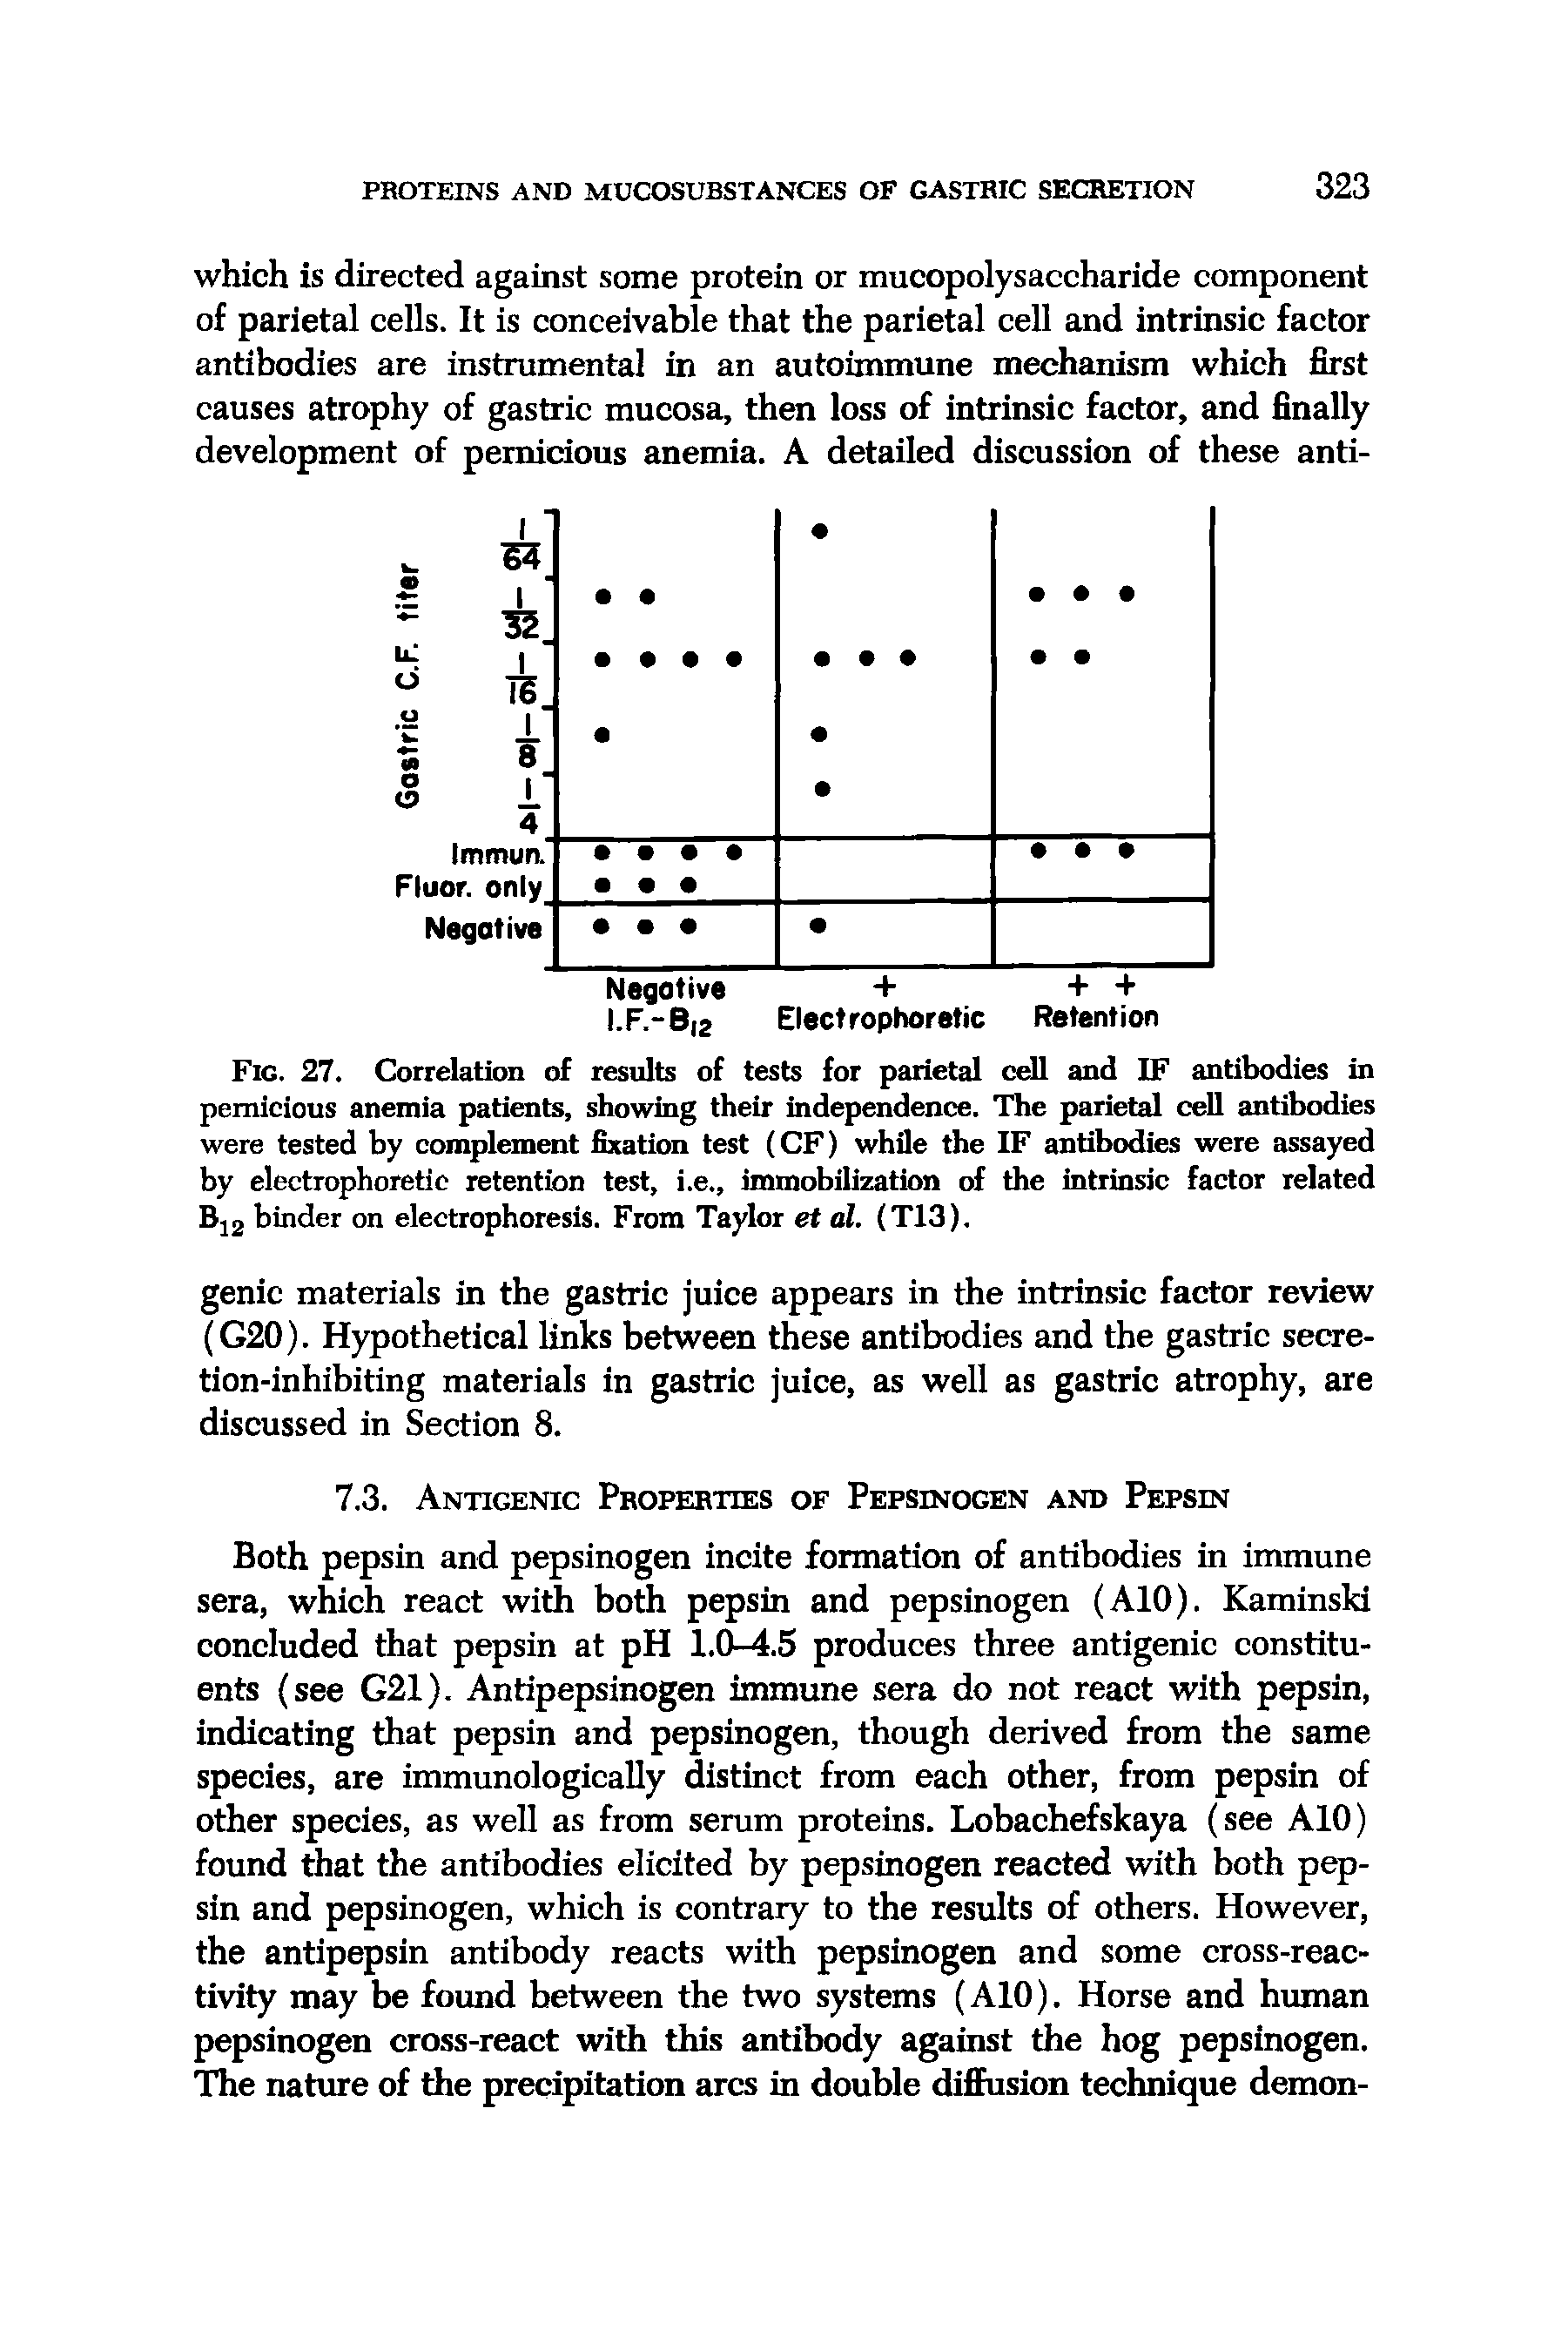 Fig. 27. Correlation of results of tests for parietal cell and IF antibodies in pernicious anemia patients, showing their independence. The parietal cell antibodies were tested by complement fixation test (CF) while the IF antibodies were assayed by electrophoretic retention test, i.e., immobilization of the intrinsic factor related Bj2 binder on electrophoresis. From Taylor et al. (T13).